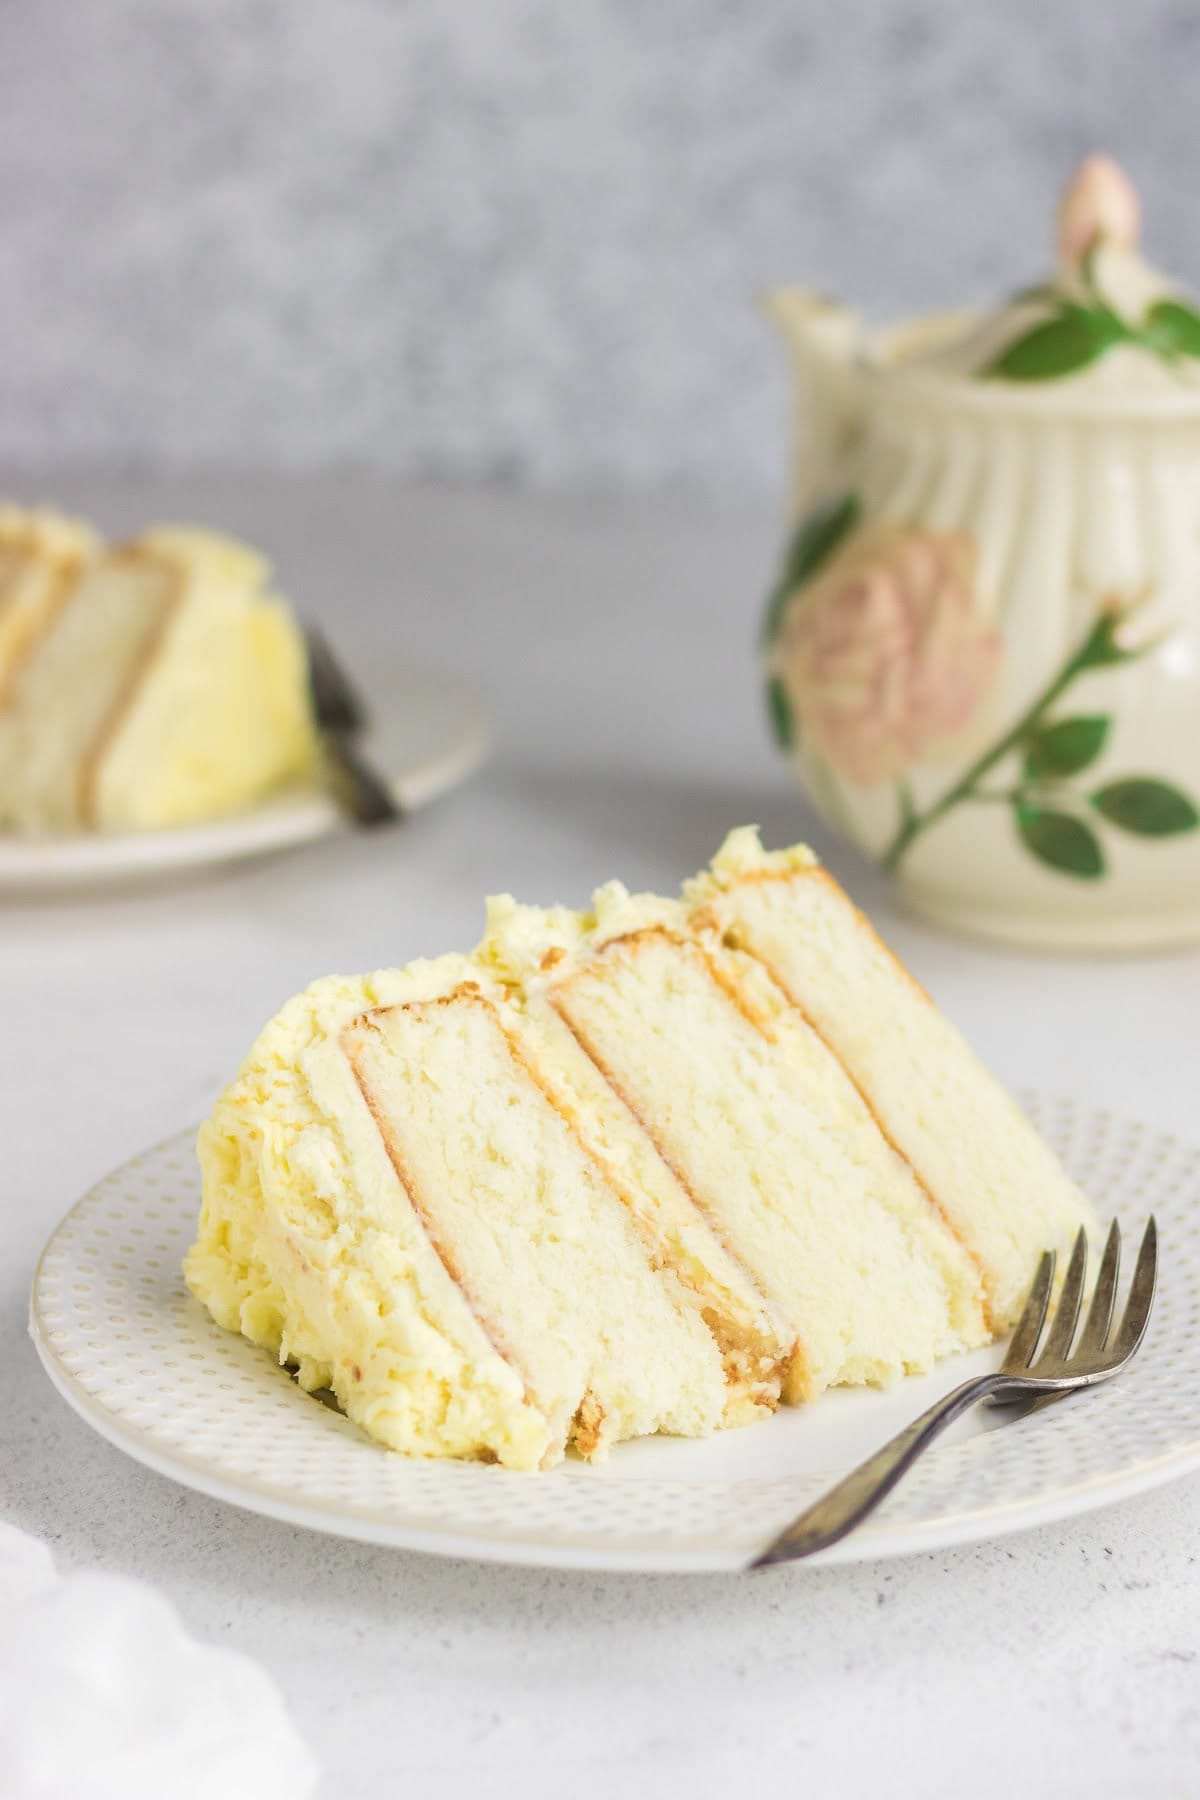 A slice of buttermilk layer cake on a plate.